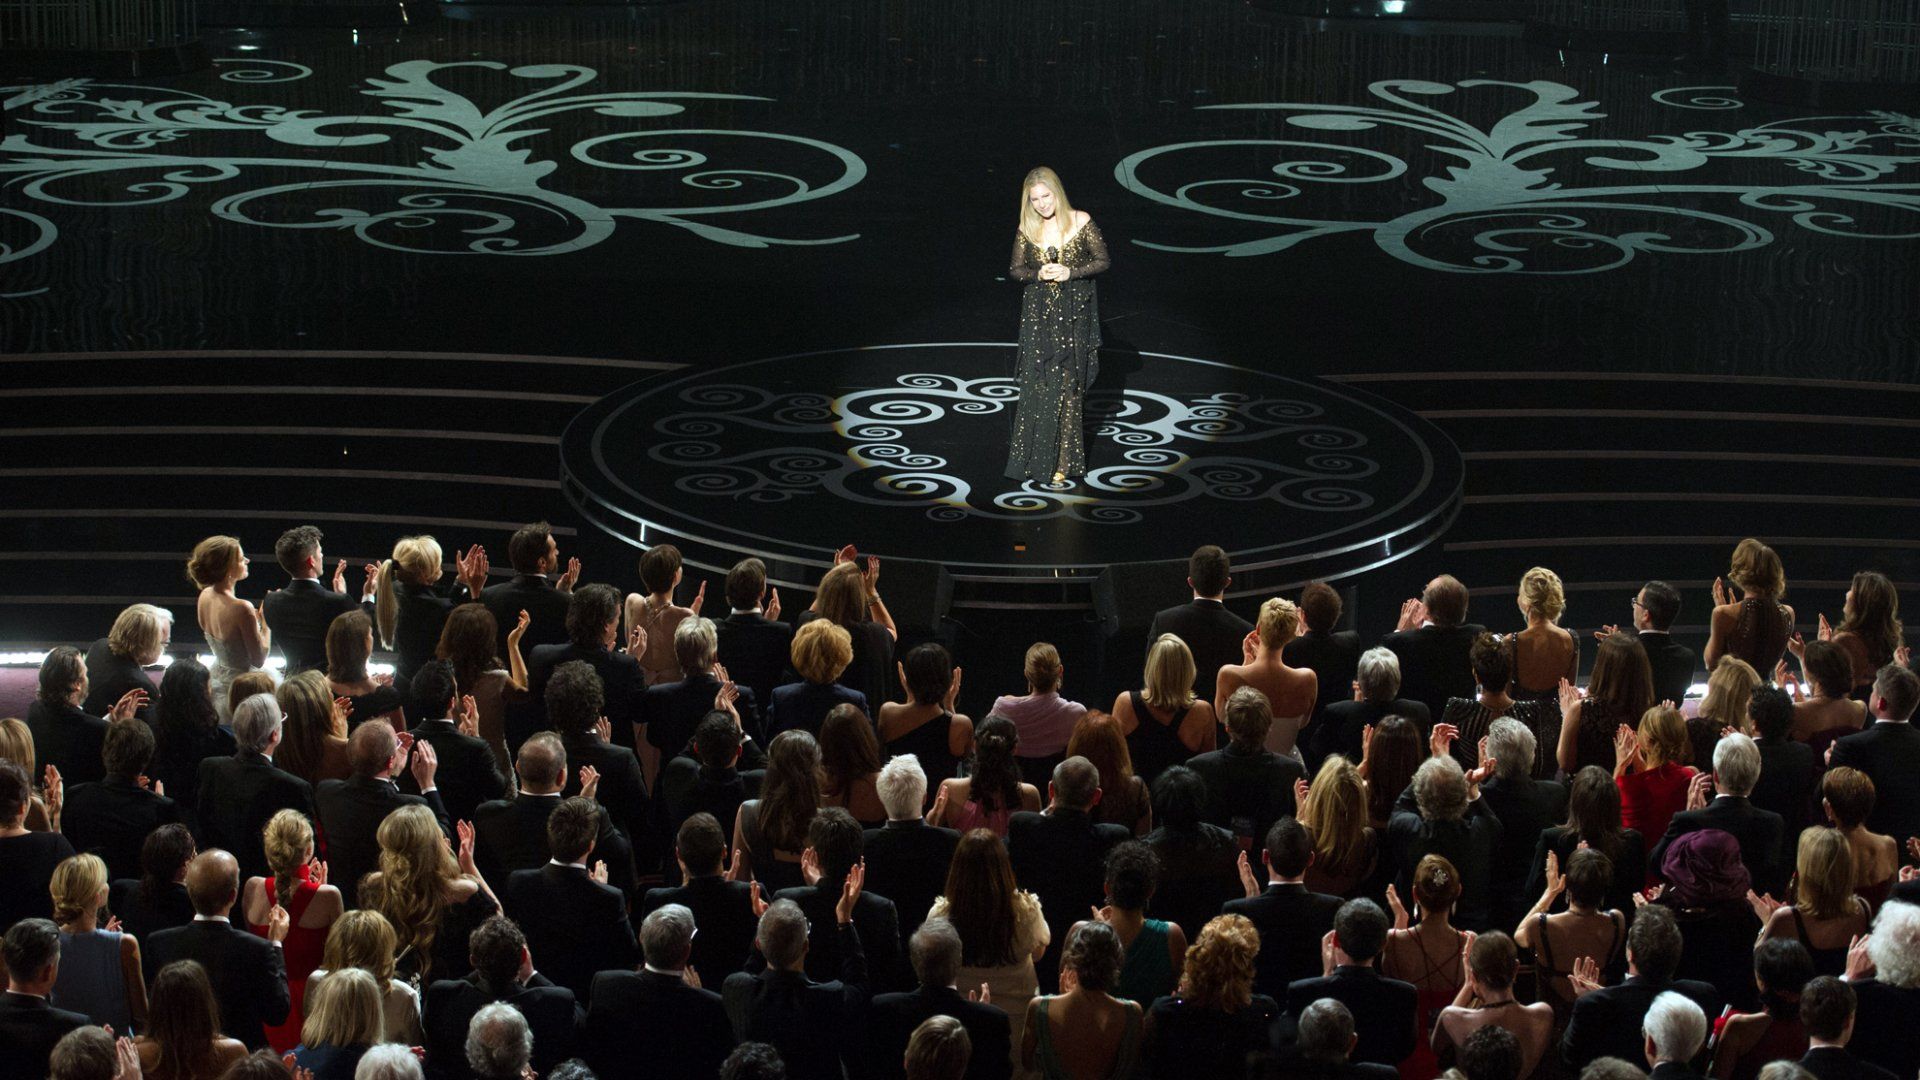 Although the show cut to commercial quickly after Barbra performed, she received a standing ovation from the audience for her tribute to Hamlisch.